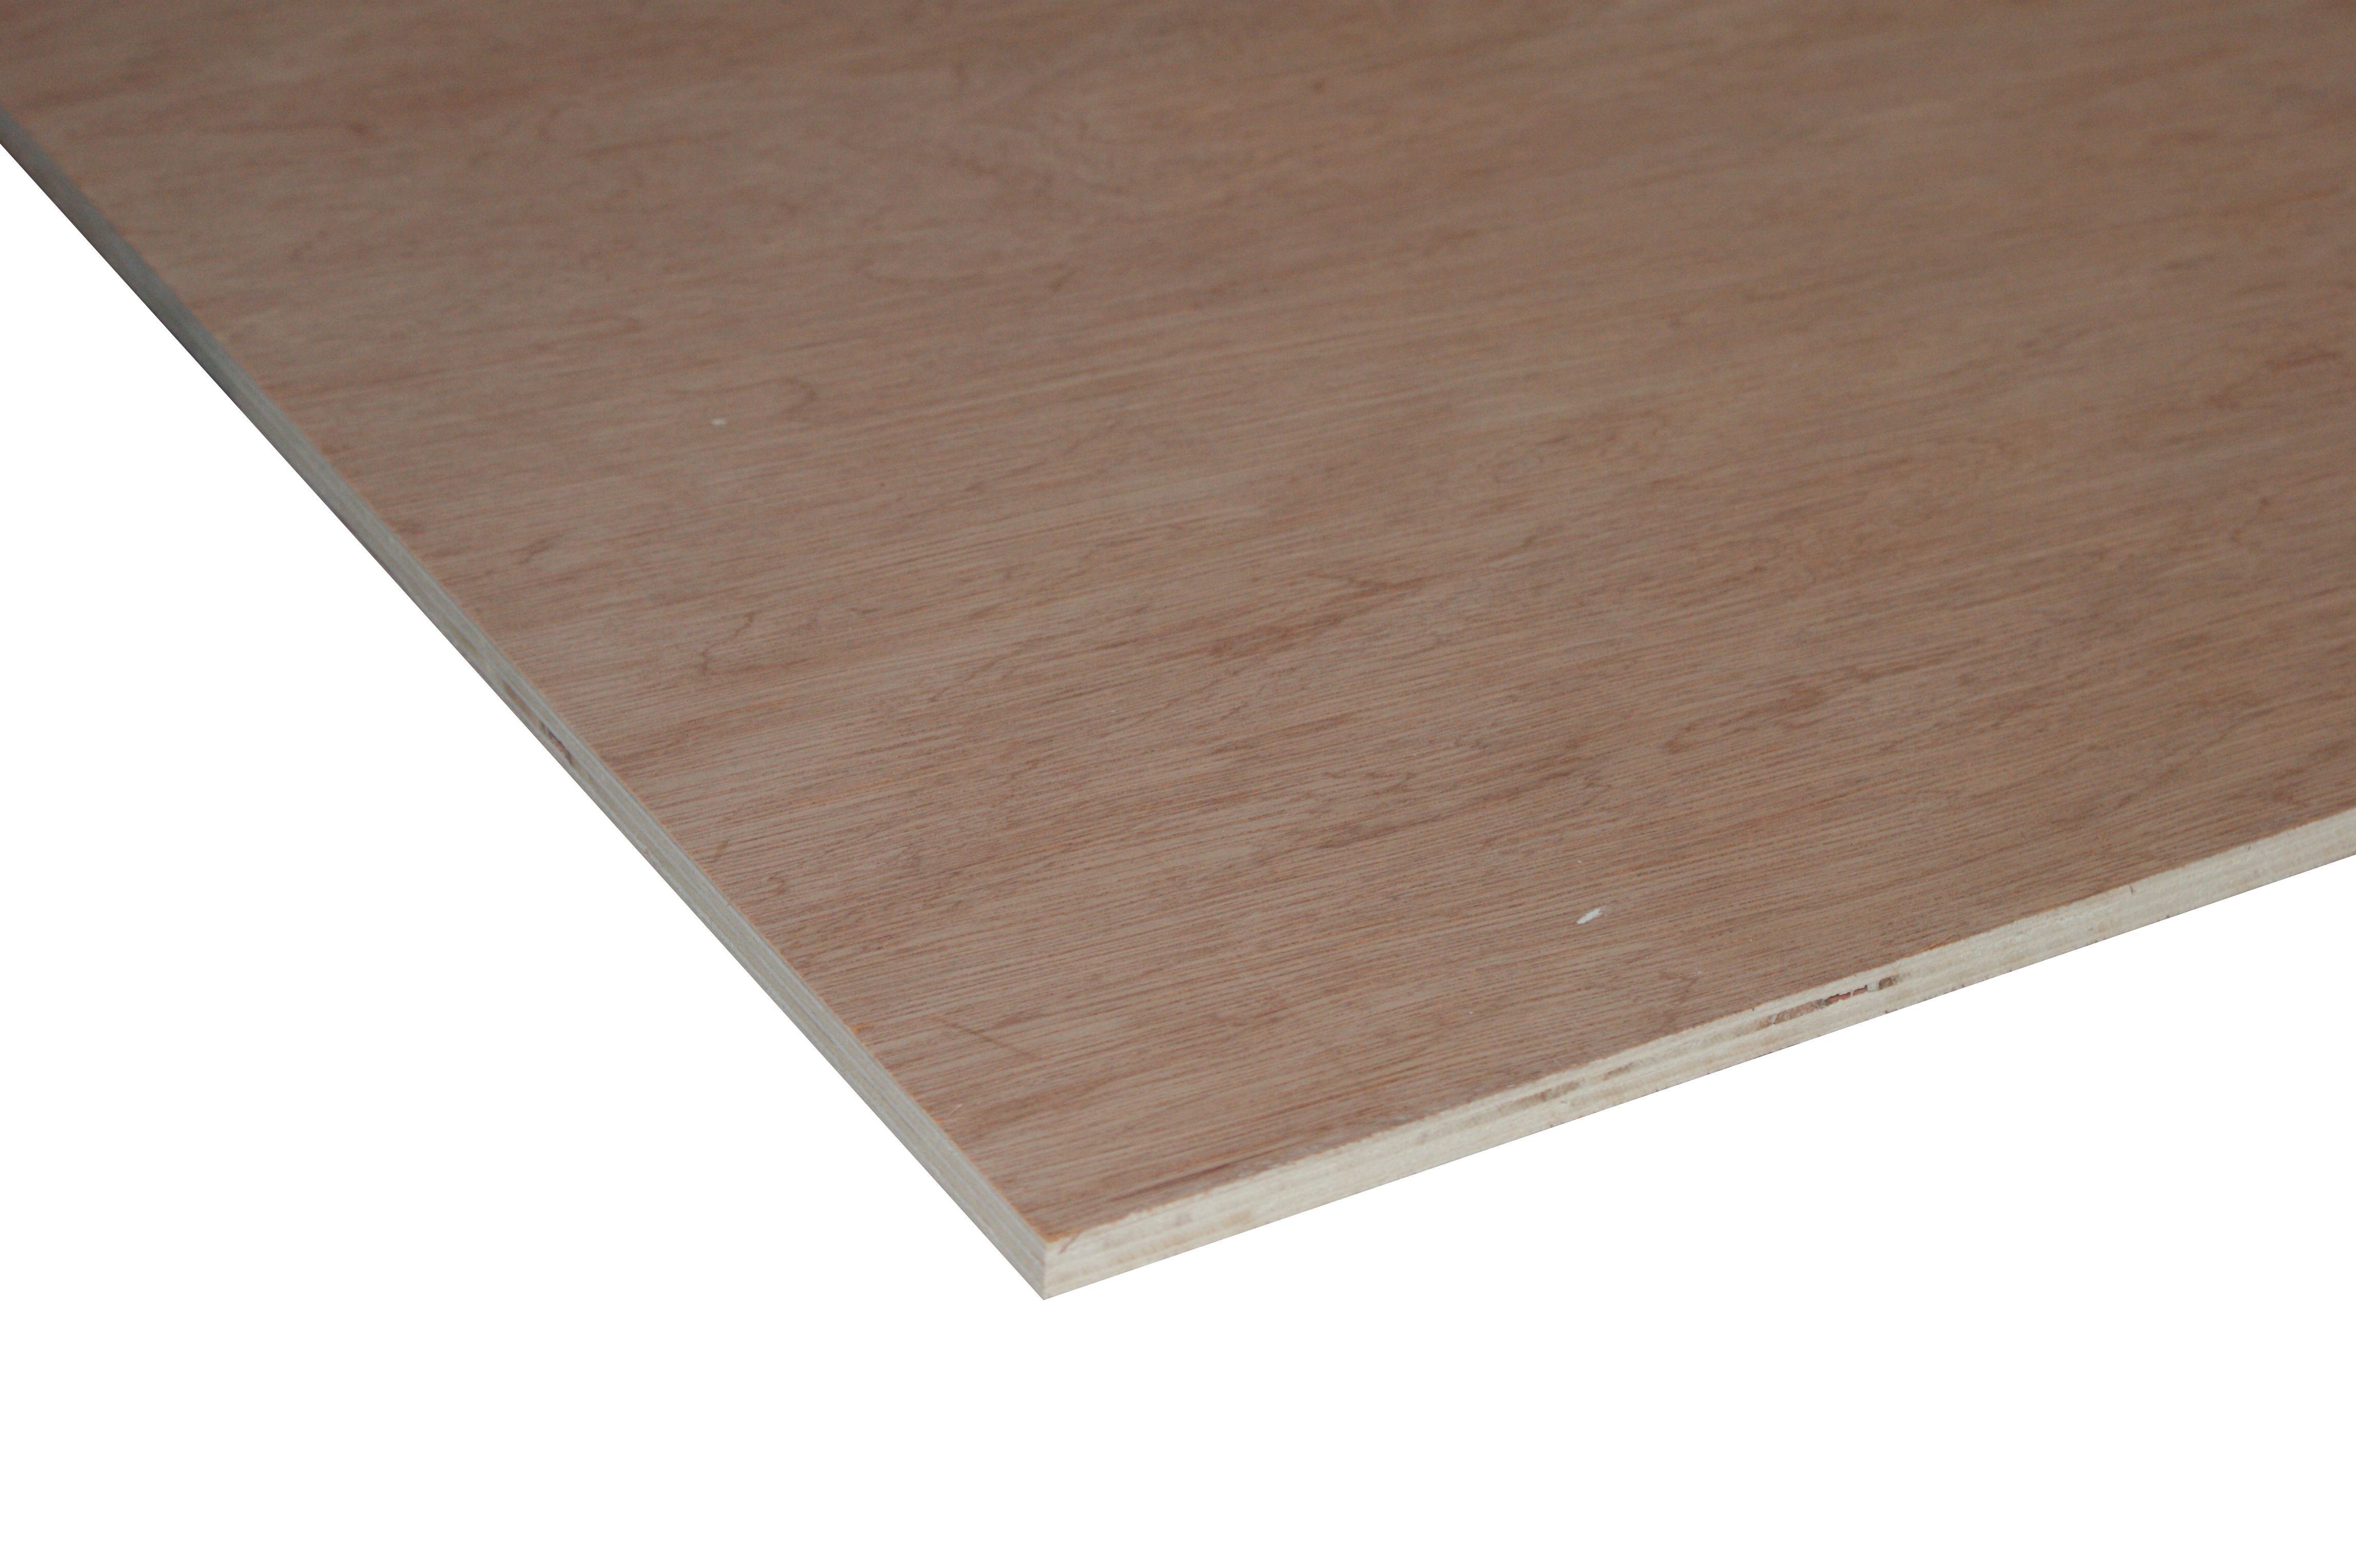 Non-Structural Hardwood Plywood Sheet - 12 x 607 x 1829mm